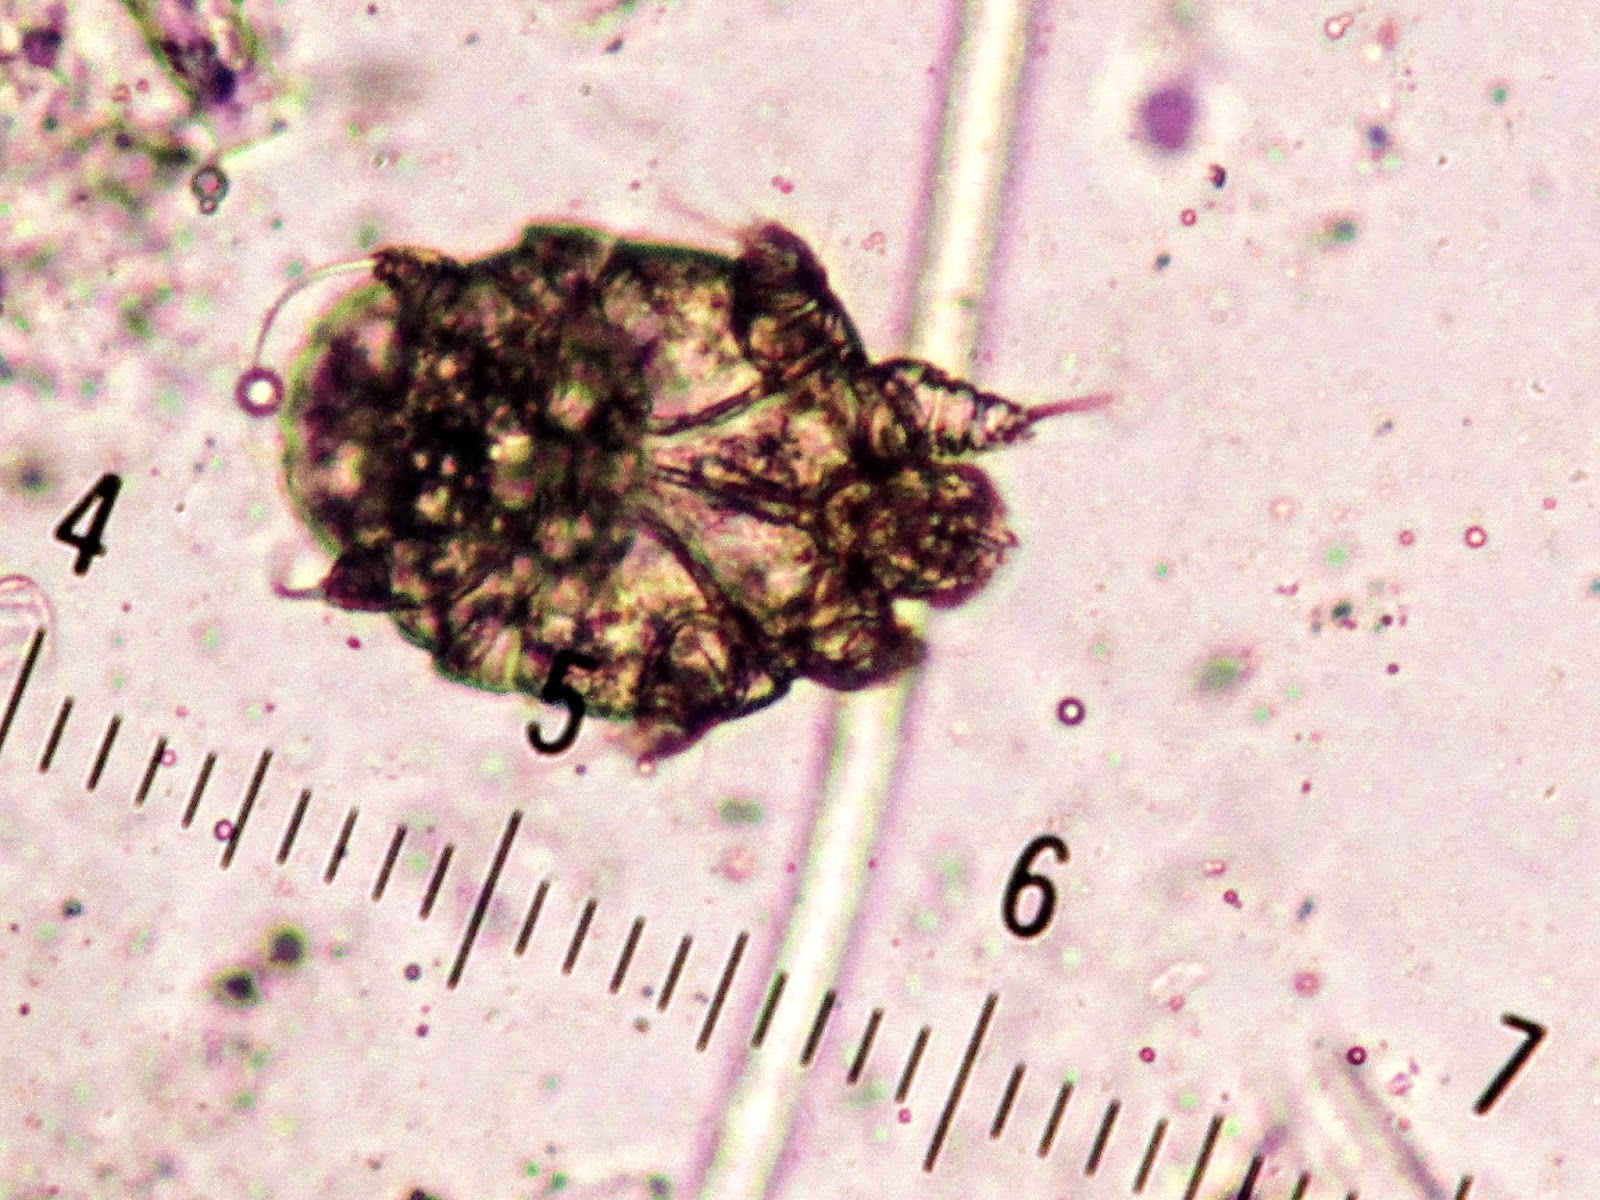 Pathology Outlines Scabies Mite